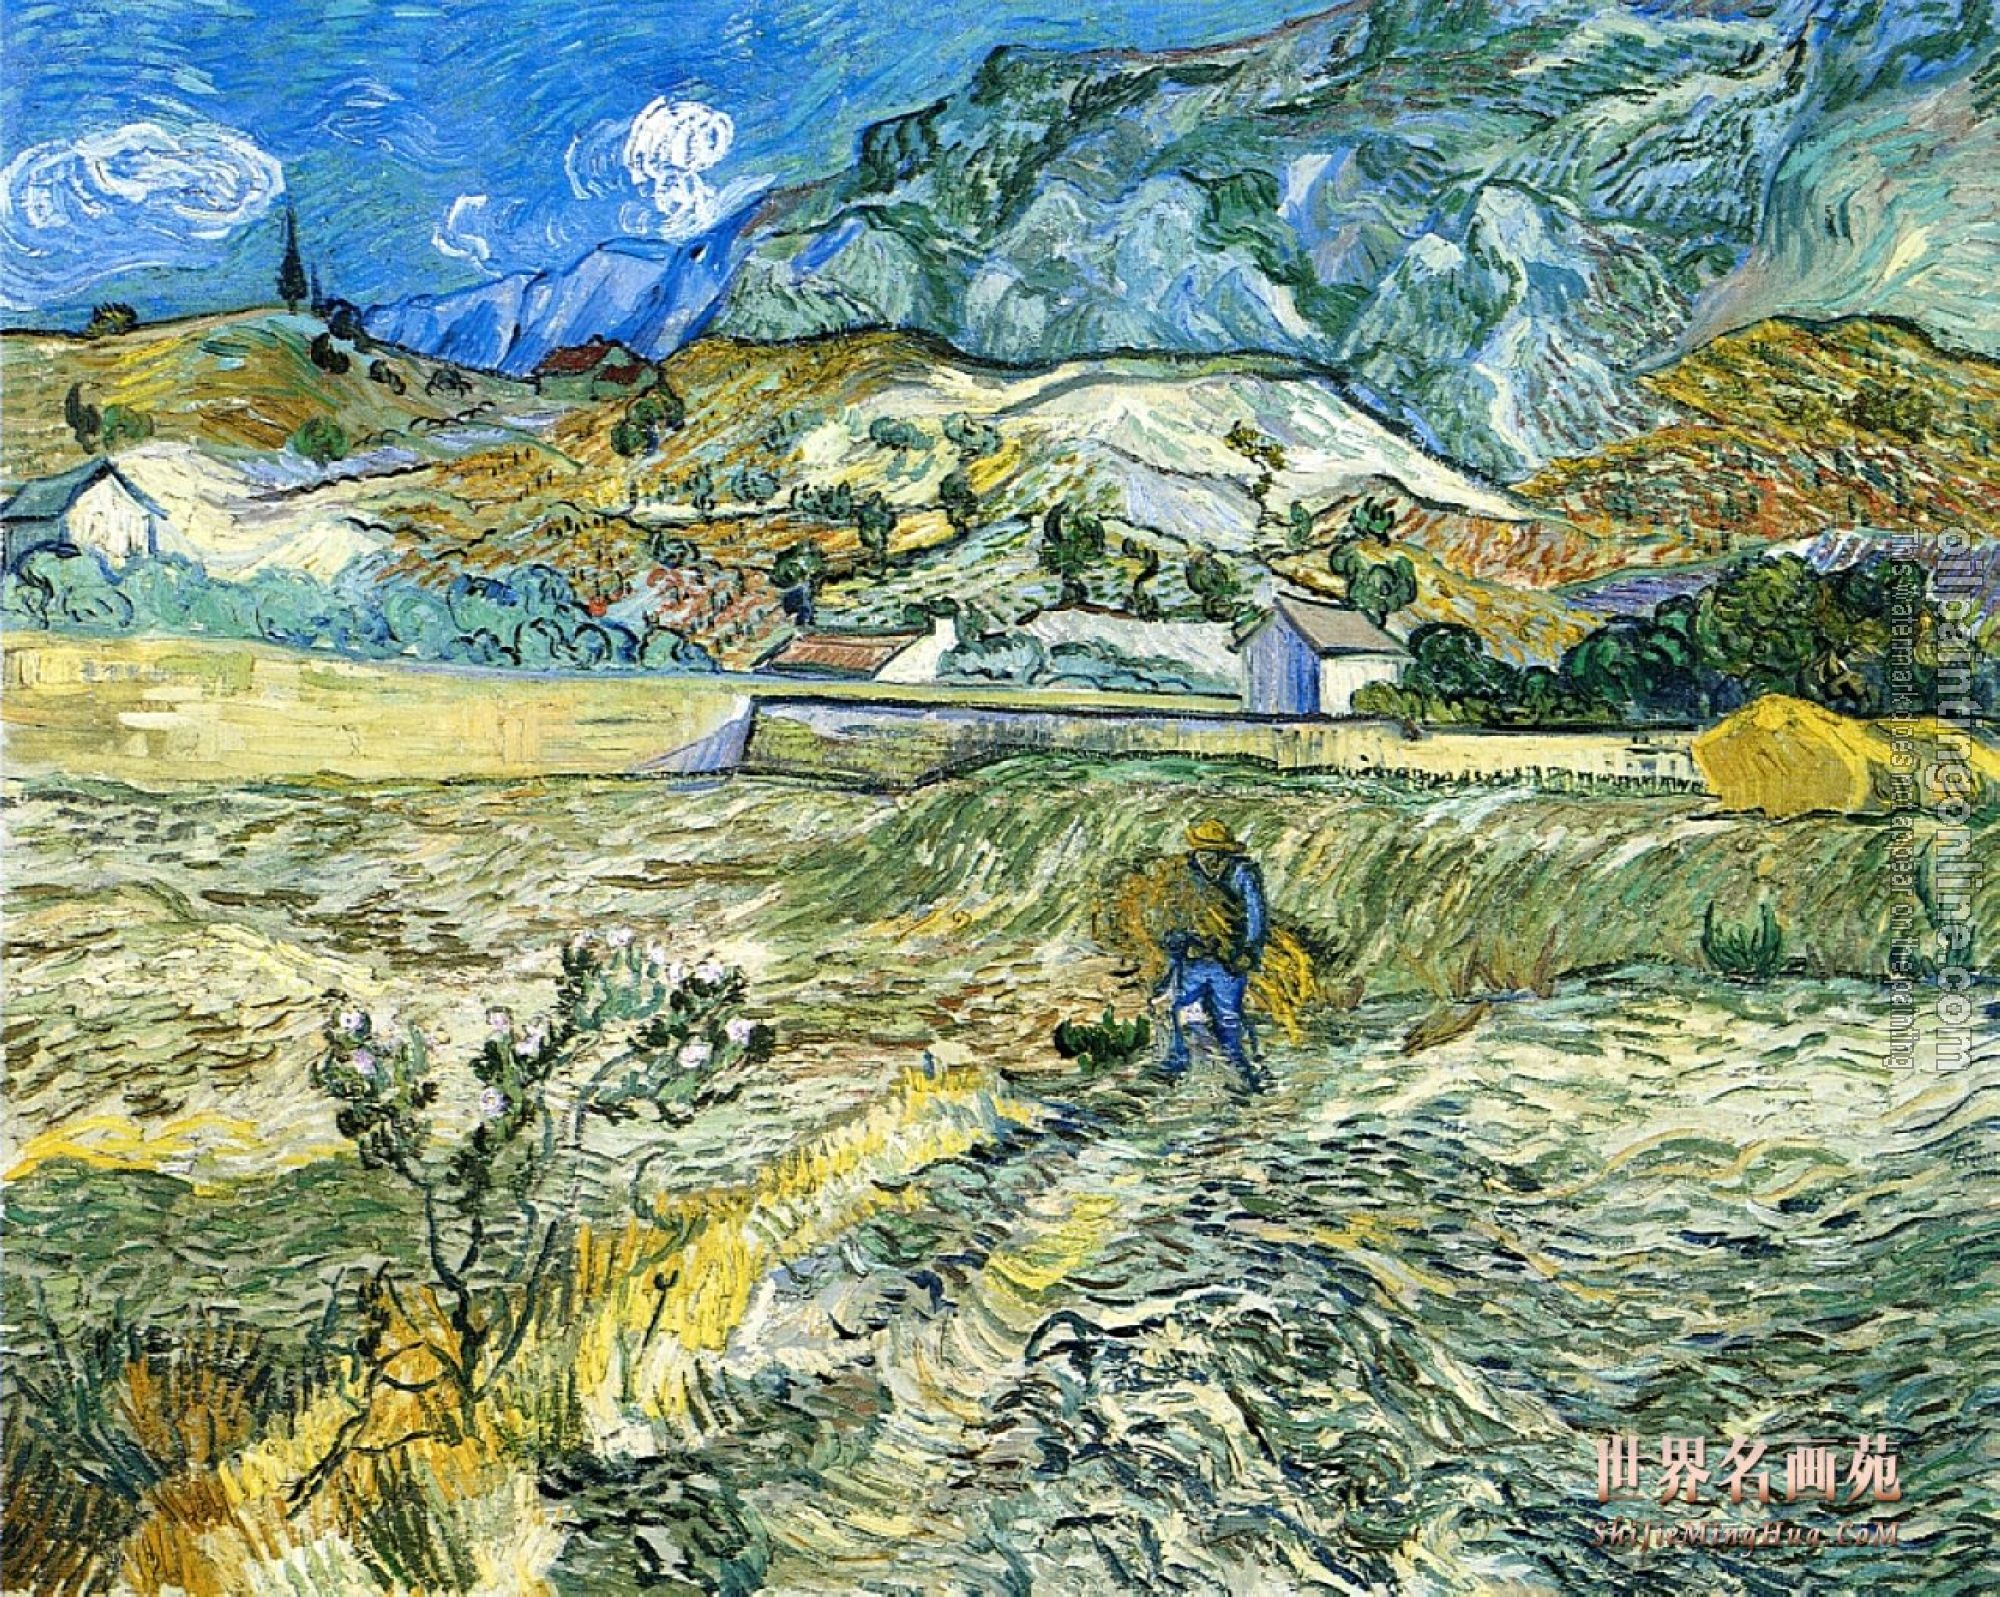 Gogh, Vincent van - Enclosed Field with Farmer Carrying a Bundle of Straw